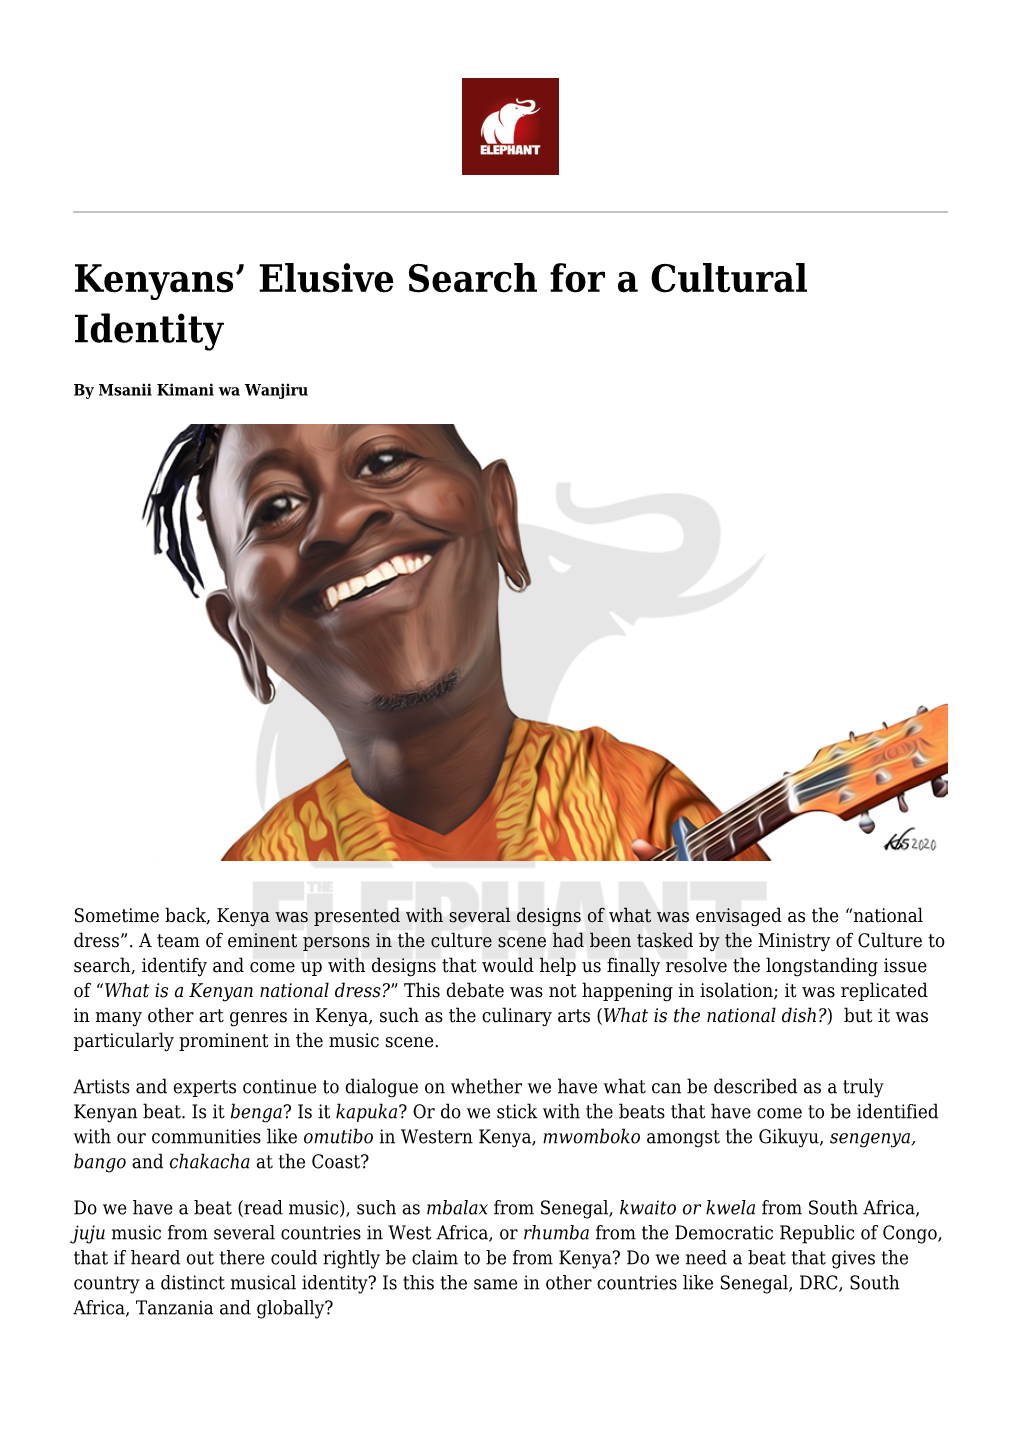 Kenyans' Elusive Search for a Cultural Identity,Black Sahibs